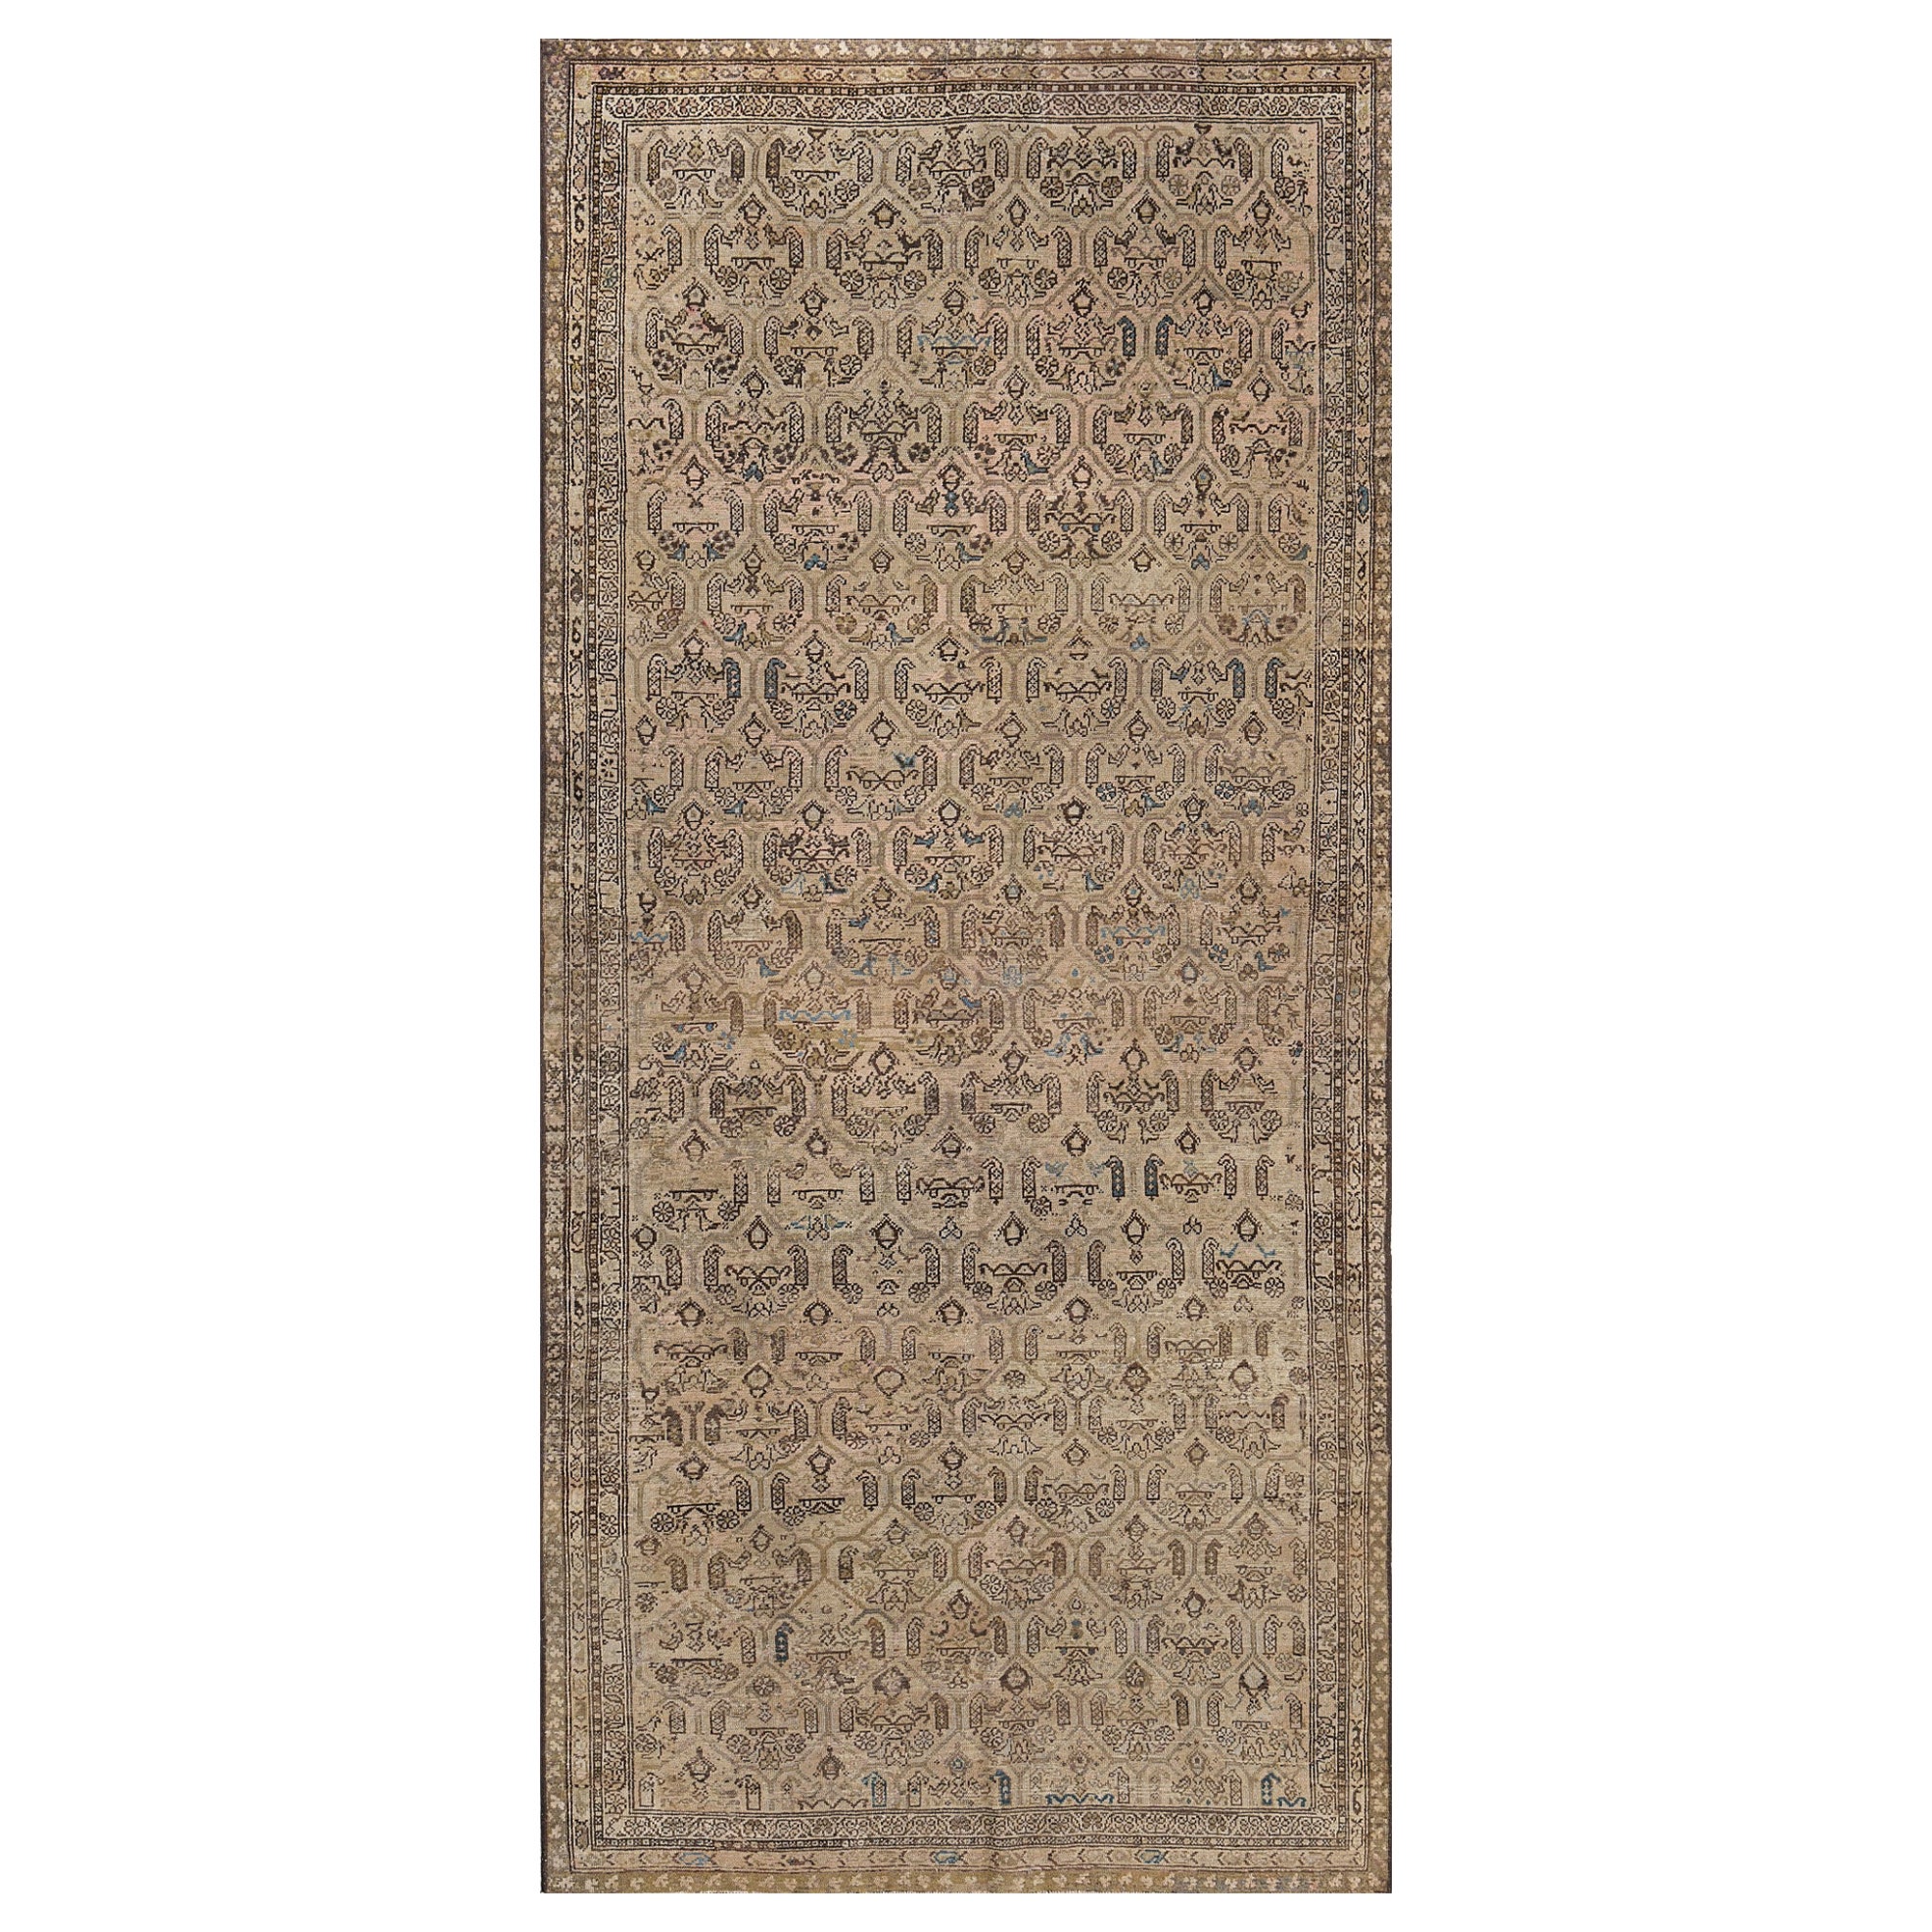 Antique Hand-knotted Floral Wool Malayer Rug